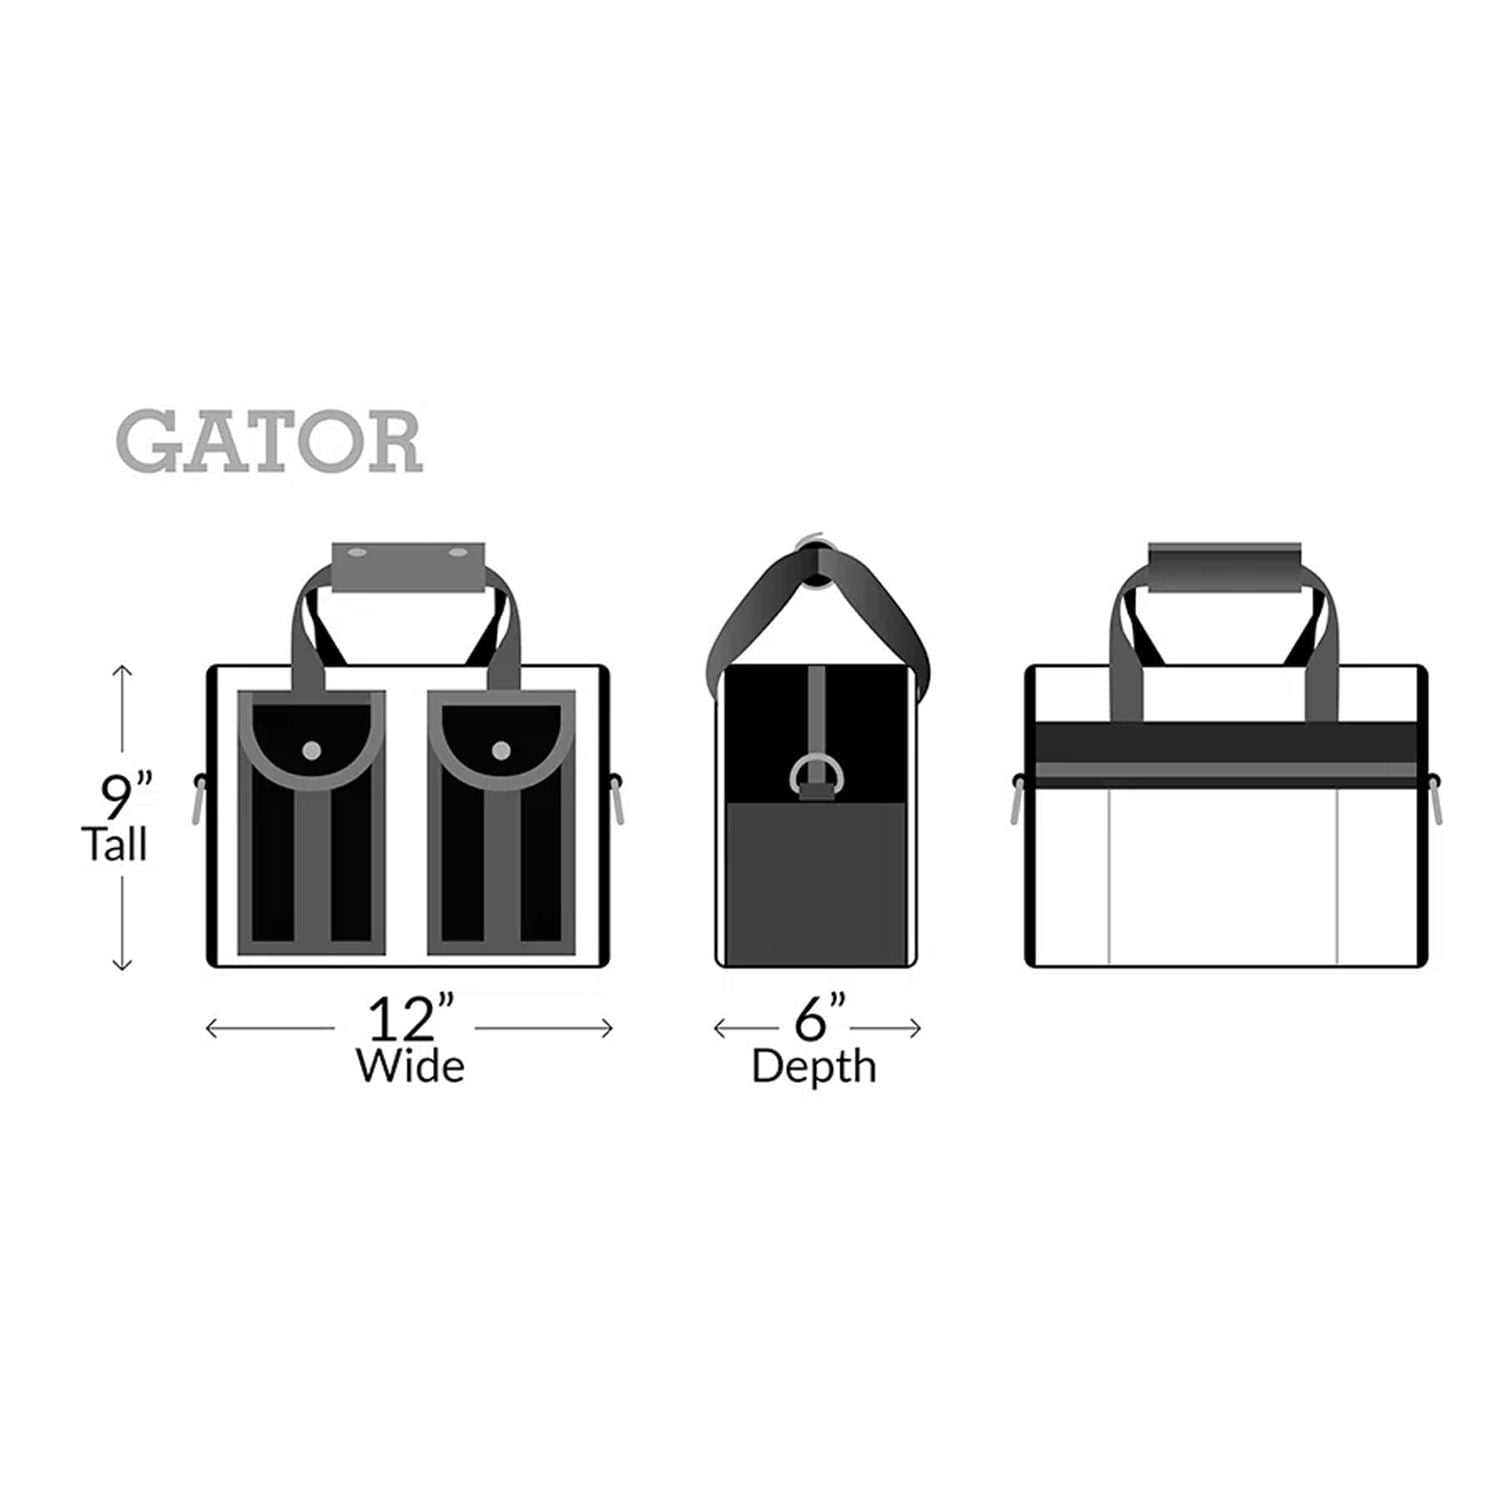 Gator bag measurements 12 inches wide x 9 inches tall x 6 inches depth